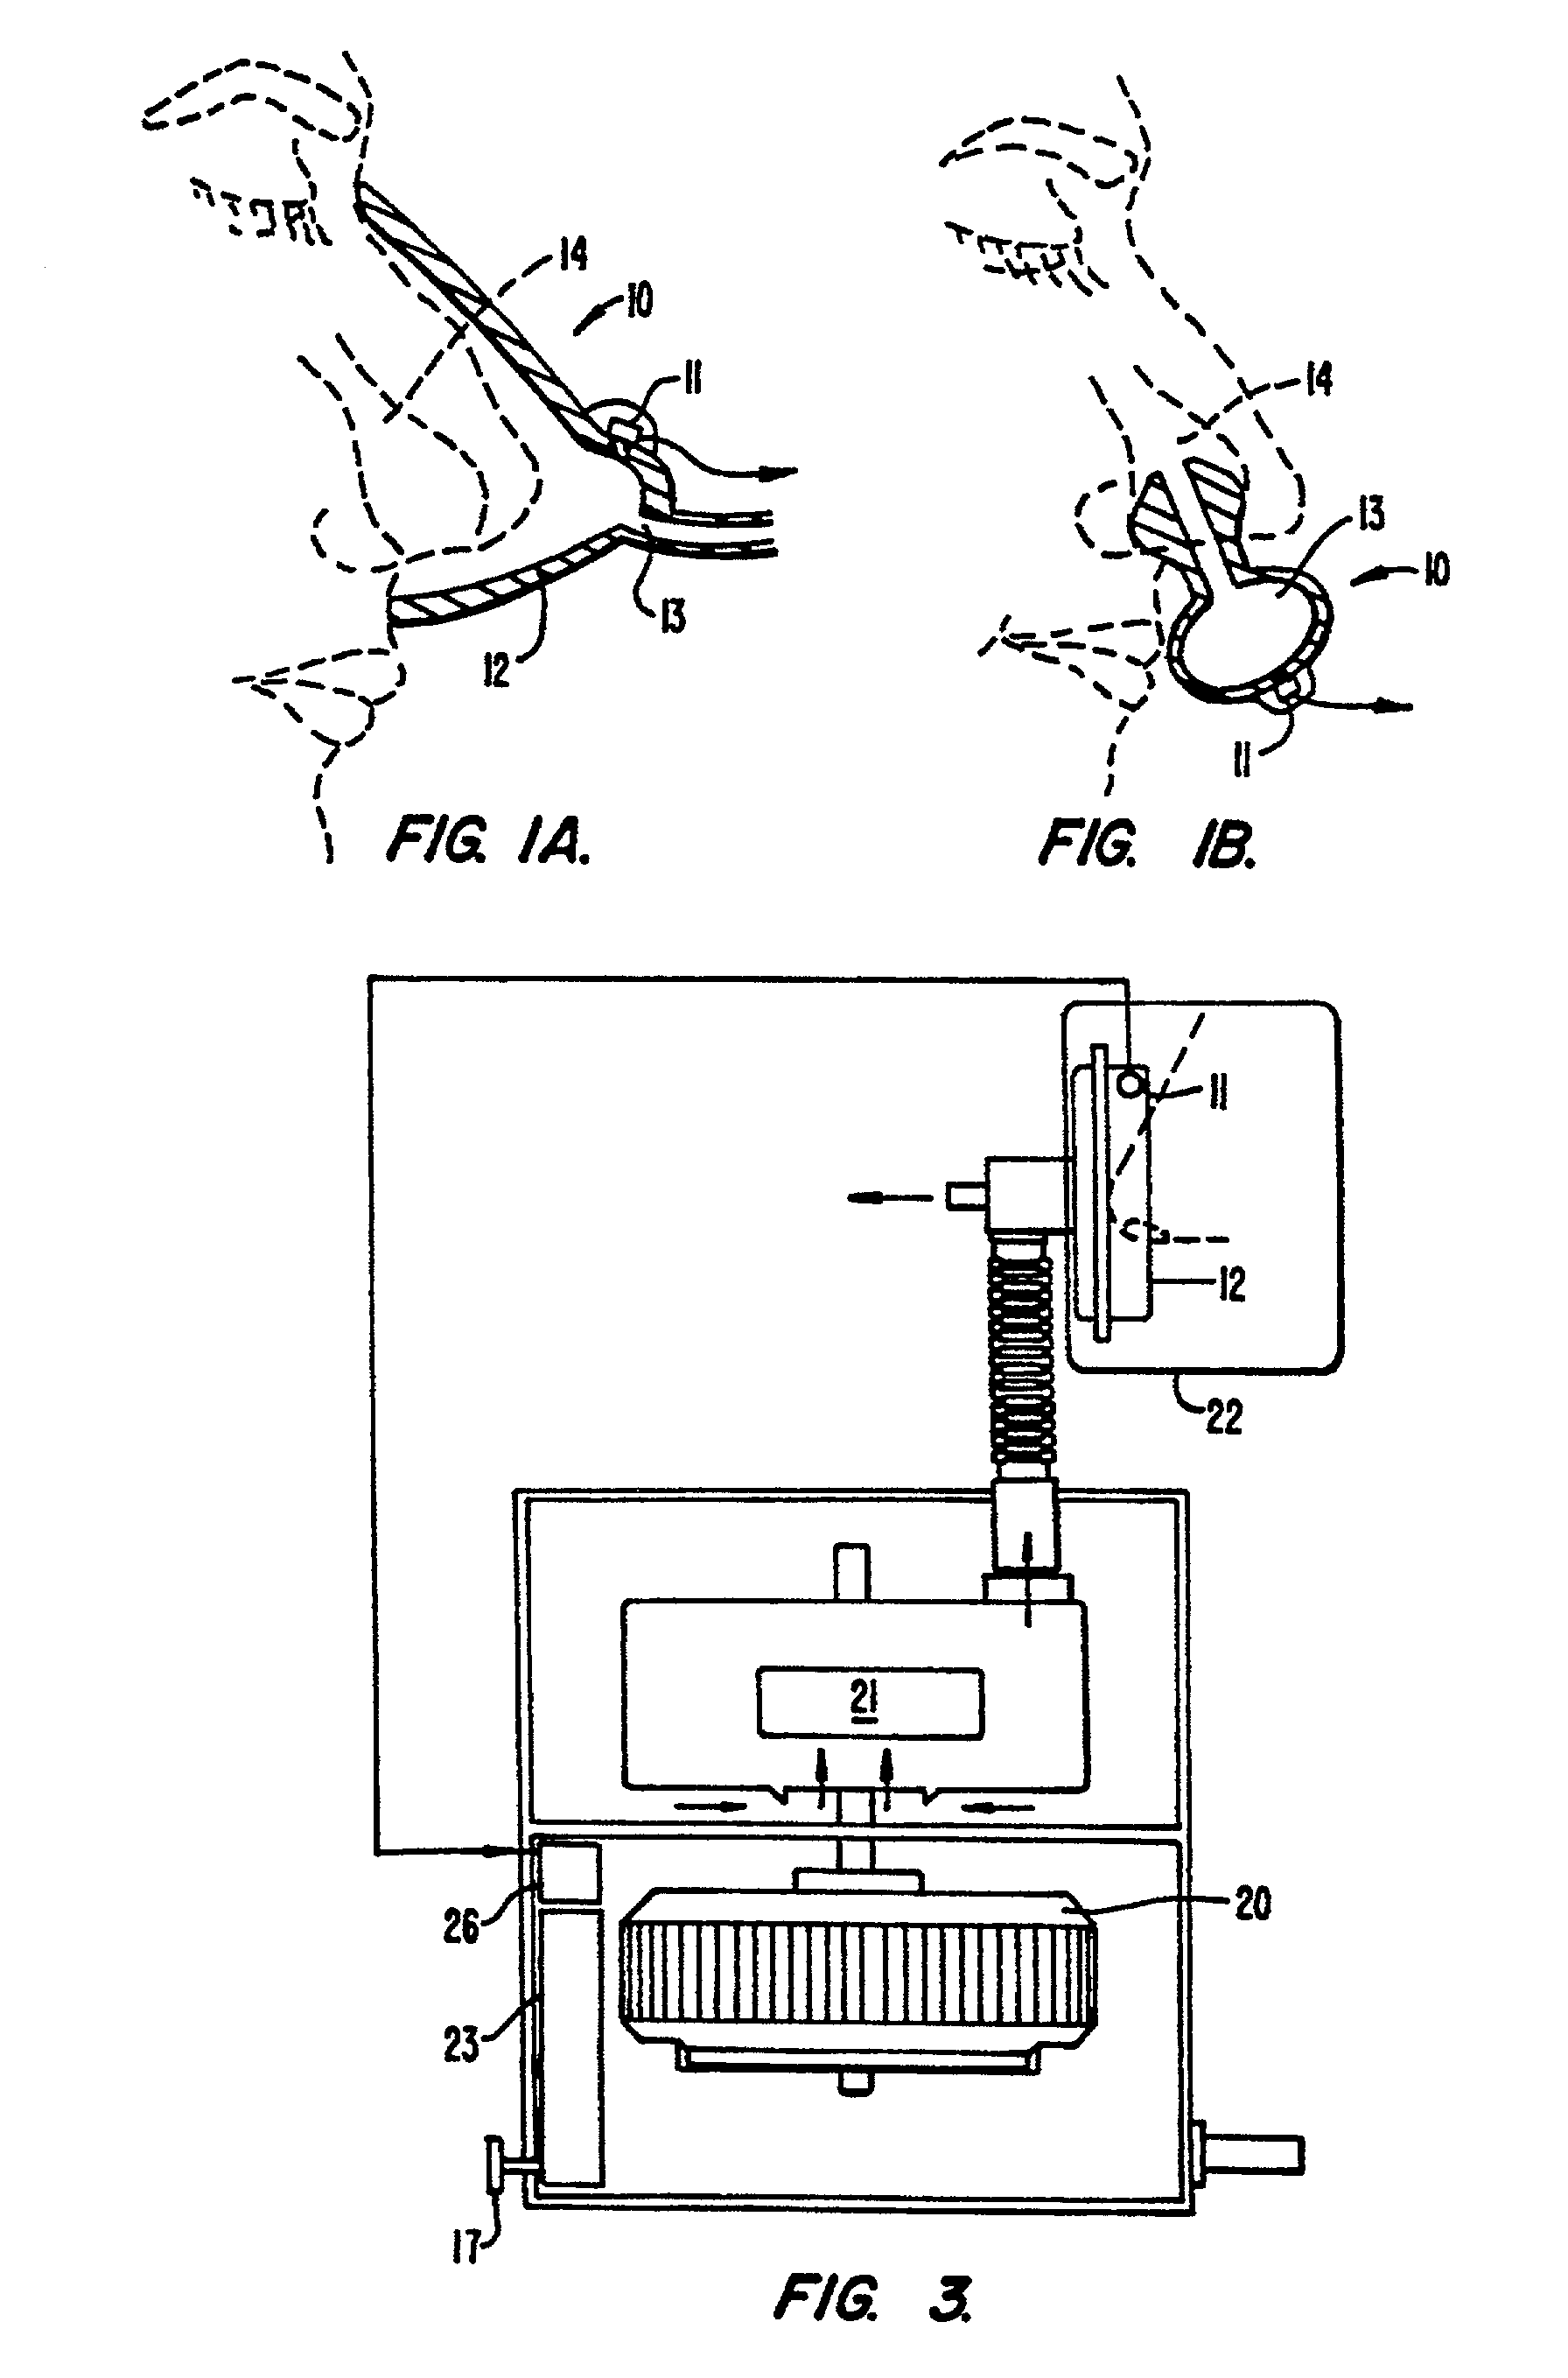 Device for monitoring breathing during sleep and ramped control of CPAP treatment